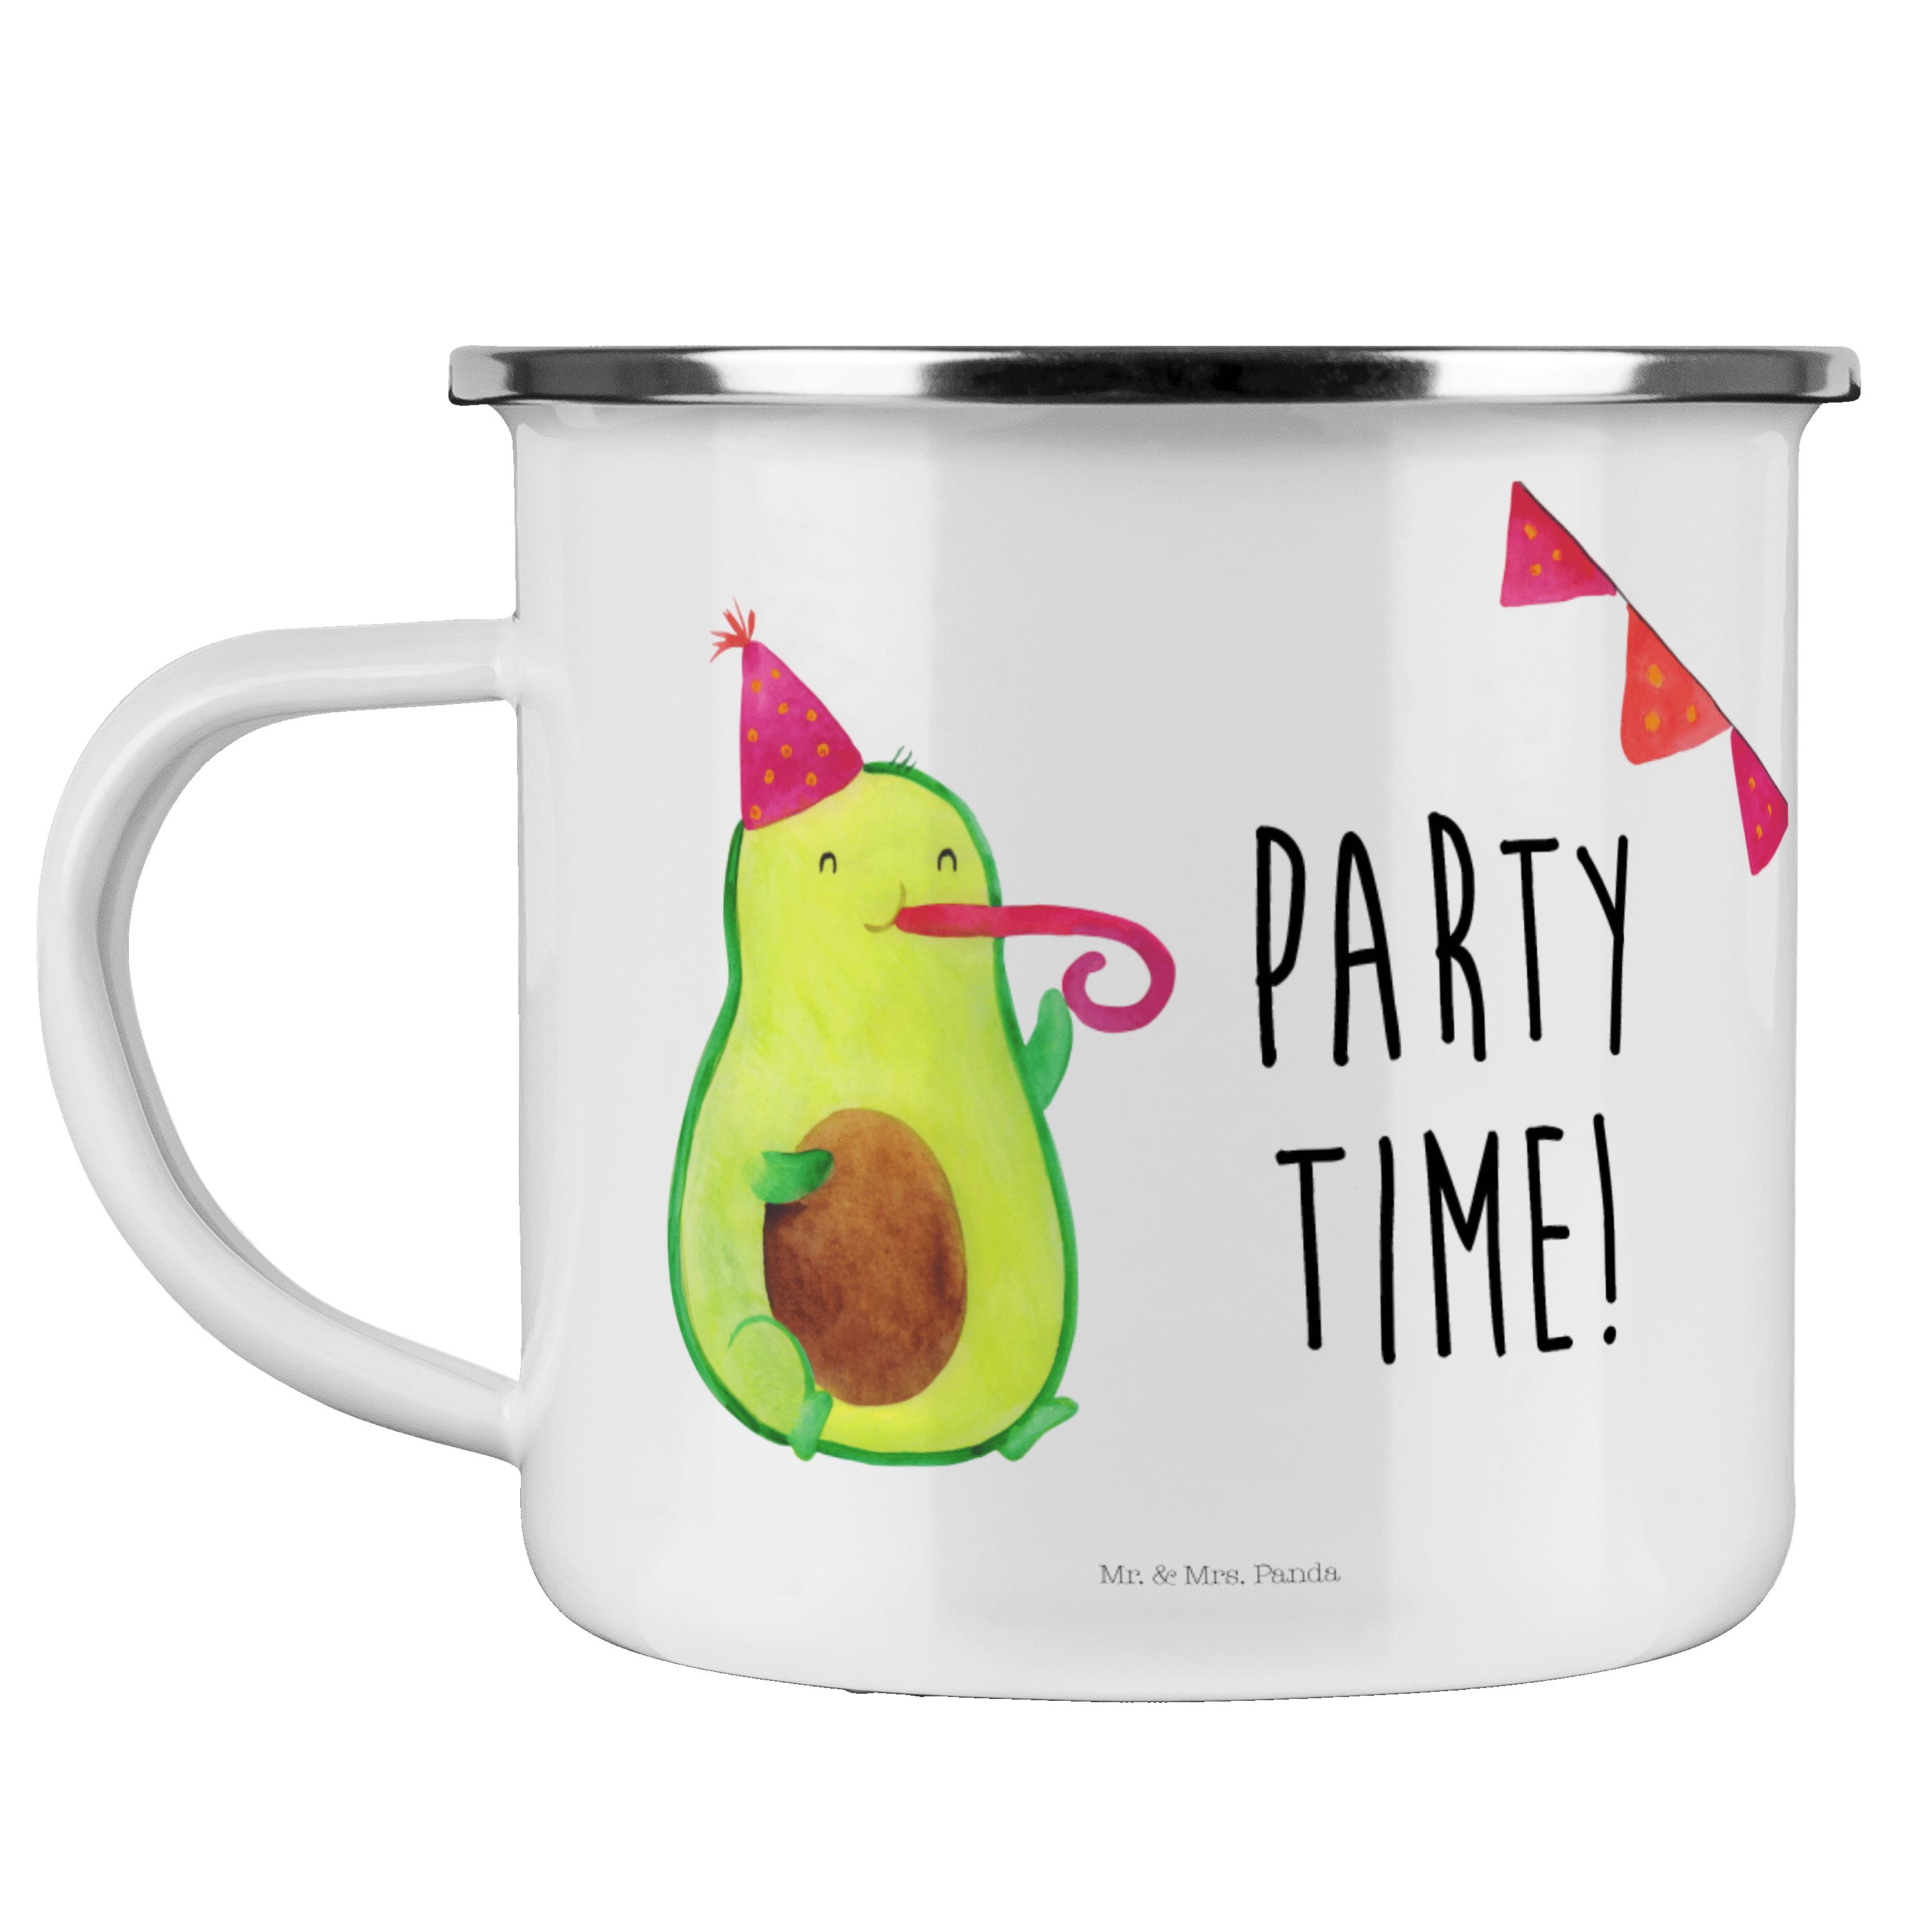 Mr. & Mrs. Panda Becher Avocado Party Time - Weiß - Geschenk, Emaille Trinkbecher, Camping Ta, Emaille